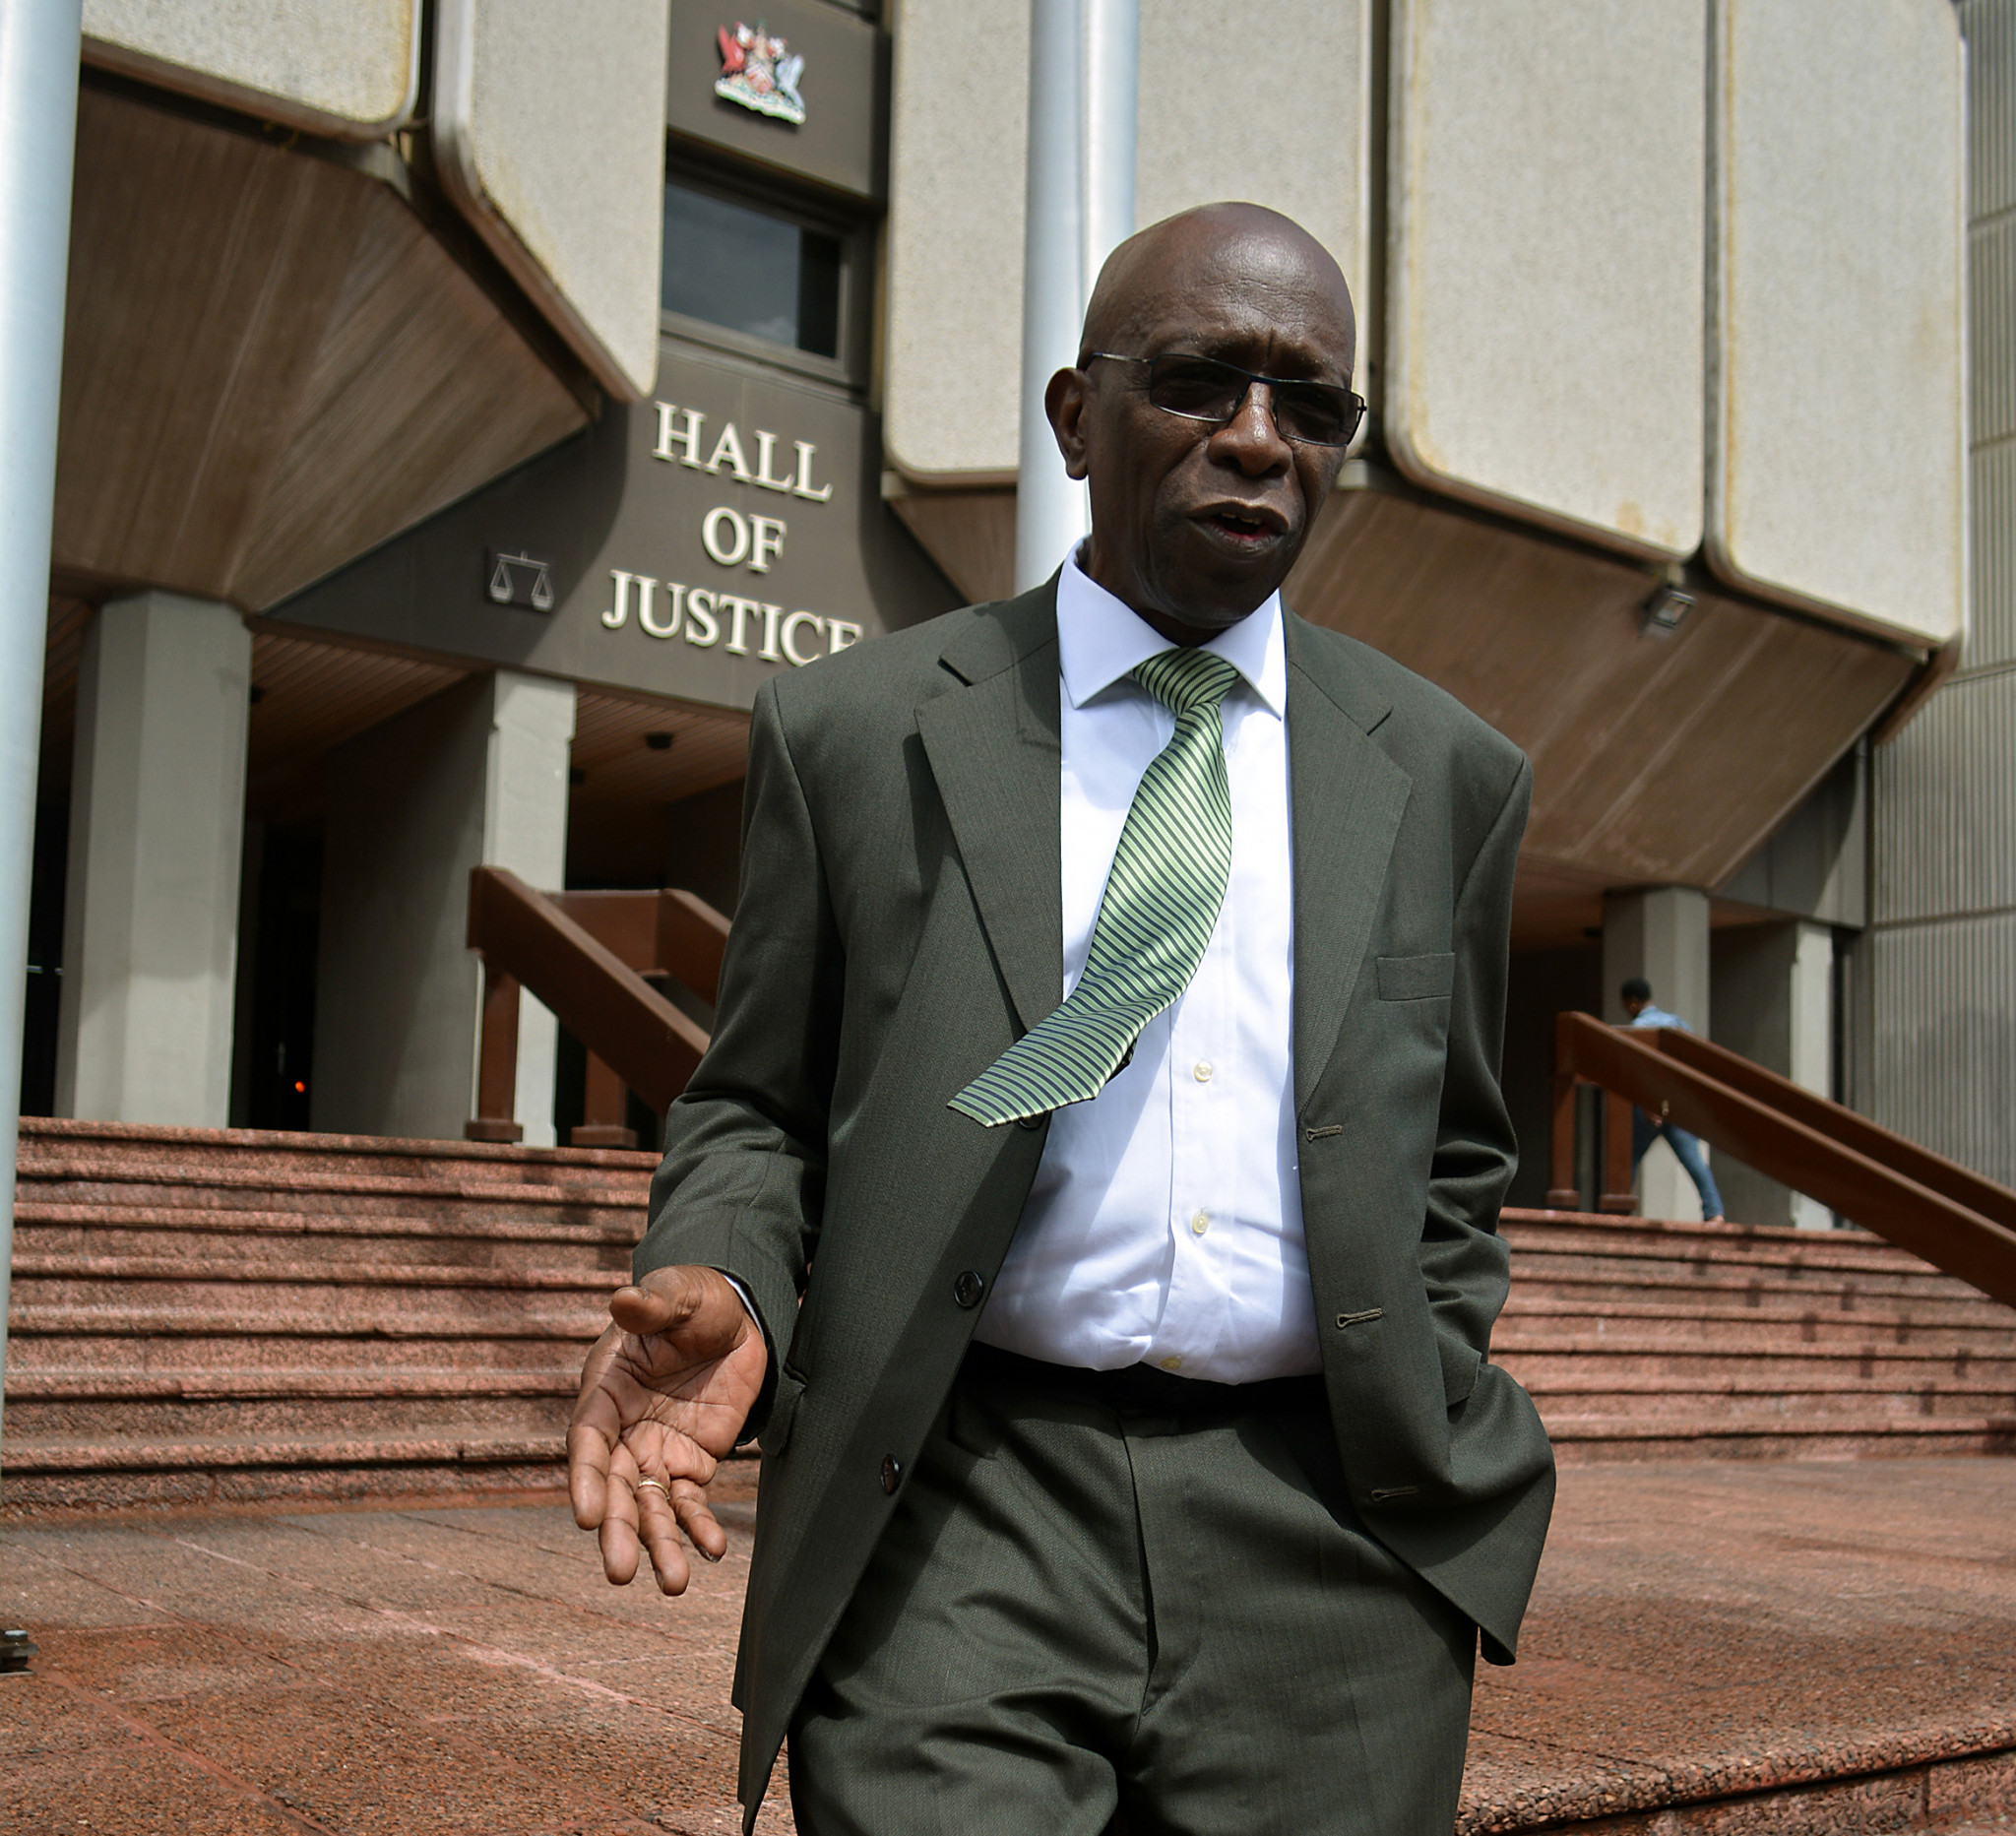 Jack Warner is accused of multiple corruption offences but denies wrongdoing ©Getty Images